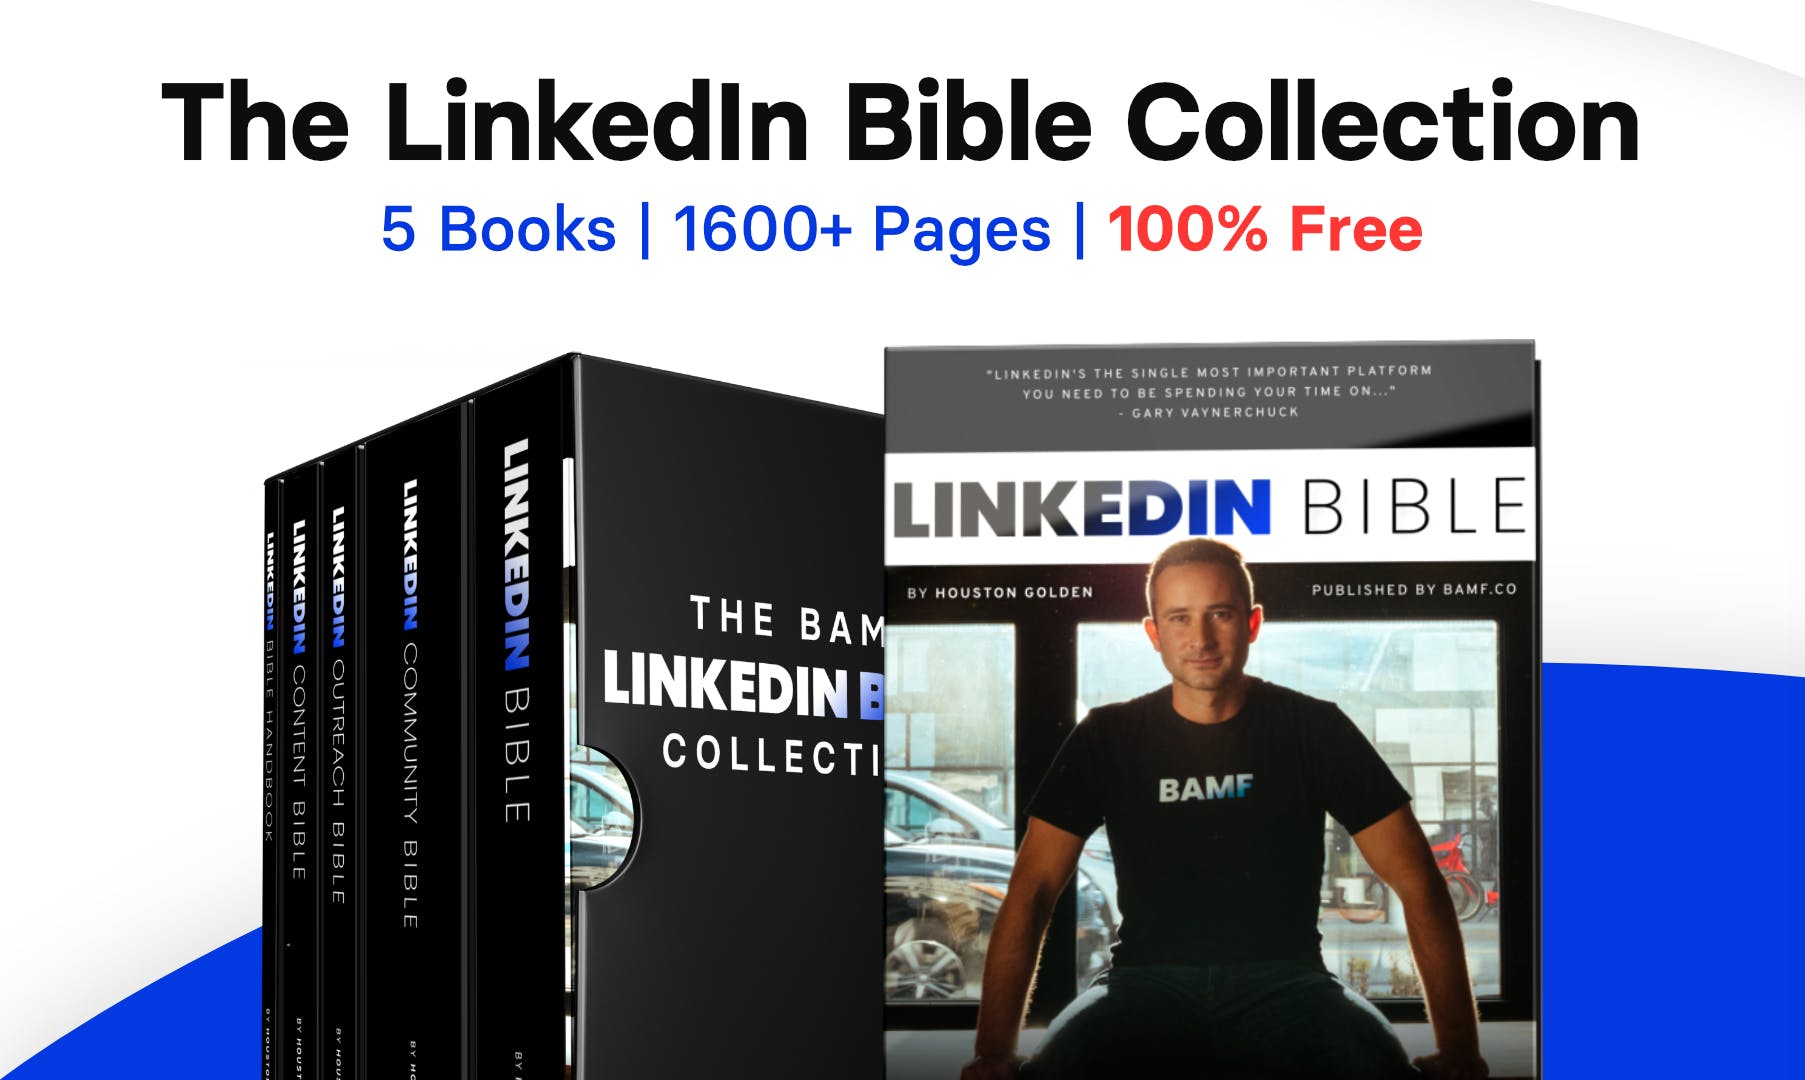 The LinkedIn Bible Collection by BAMF media 1